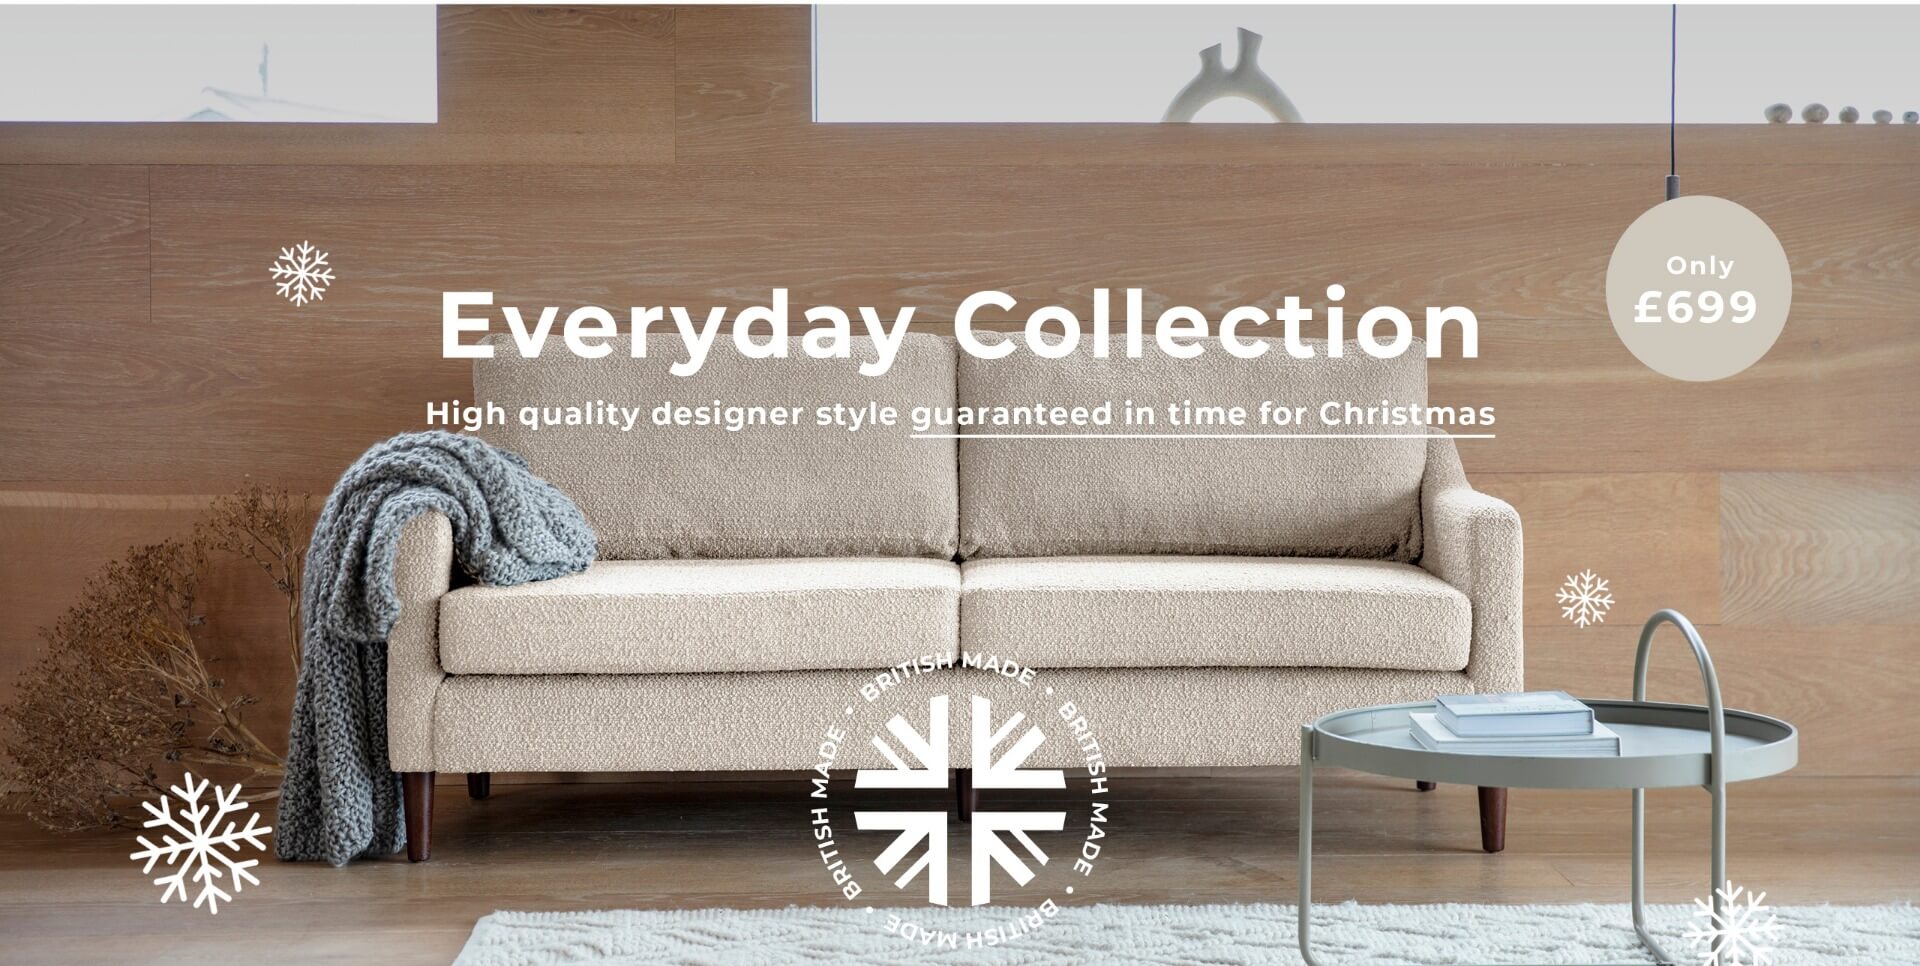 SHOP THE EVERYDAY COLLECTION